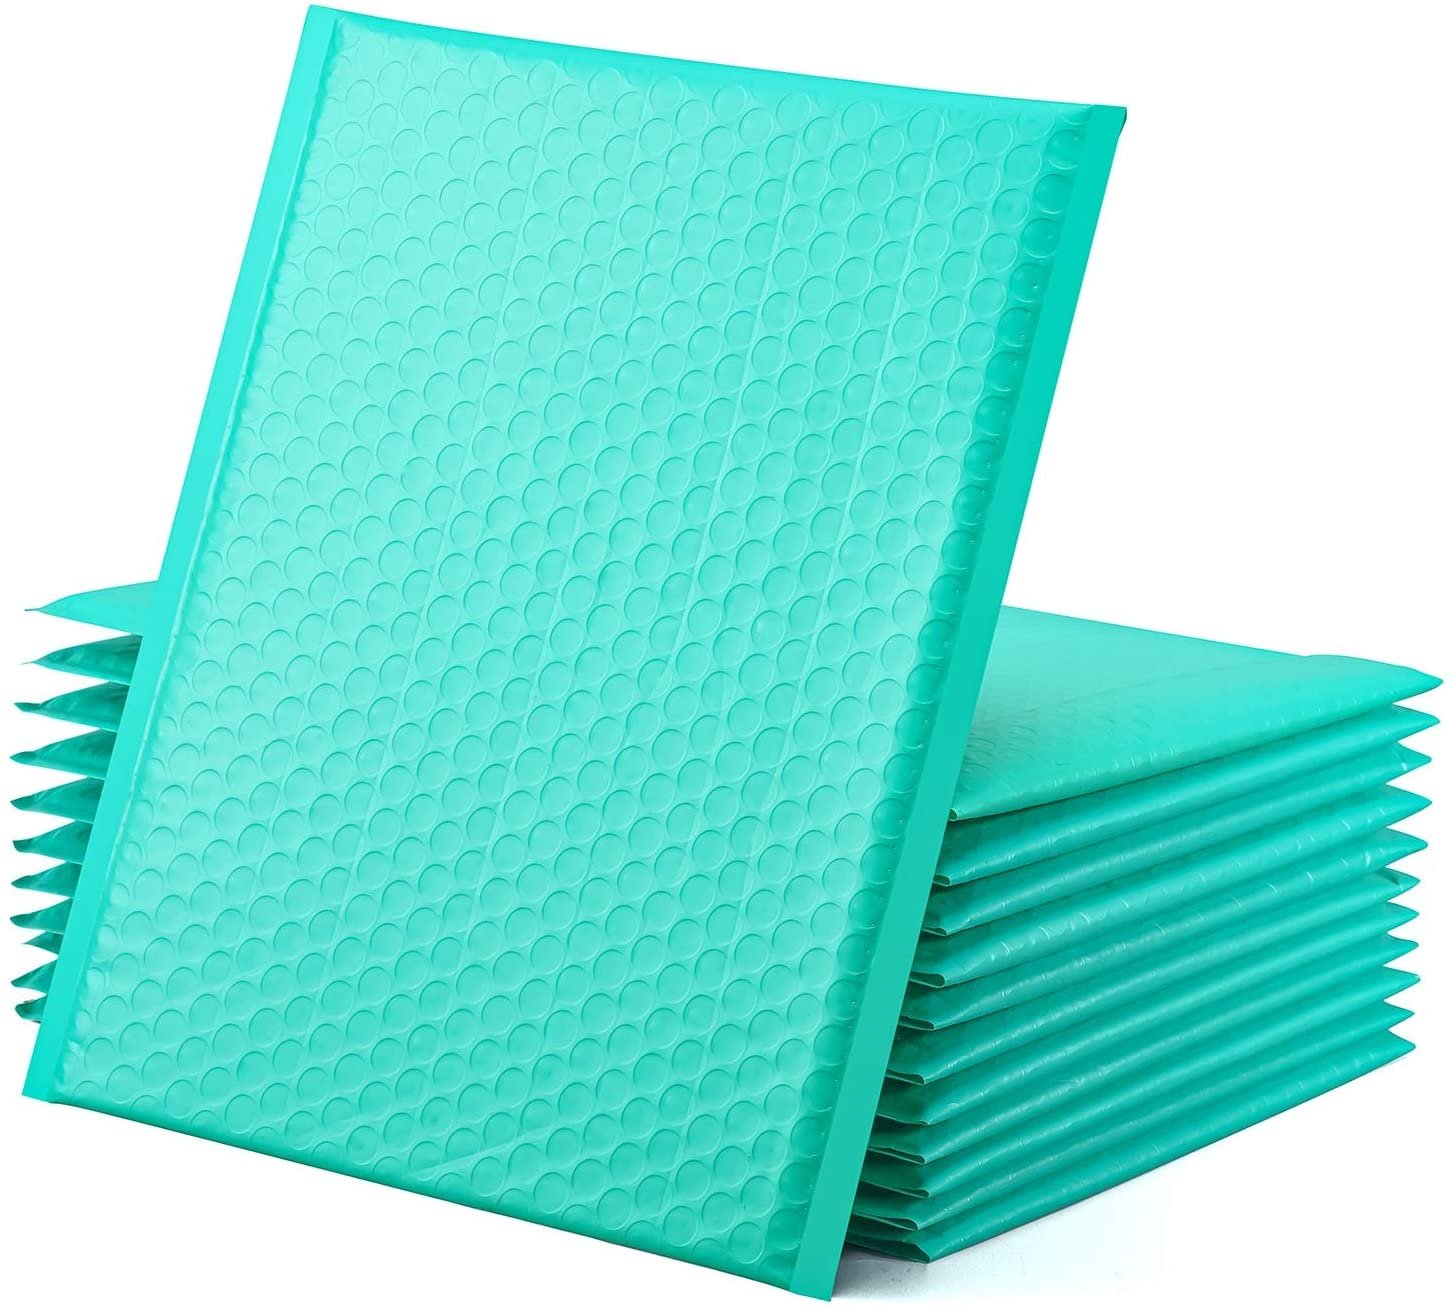 UCGOU Bubble Mailers 8.5x12 Inch Teal 25 Pack Poly Padded Envelopes